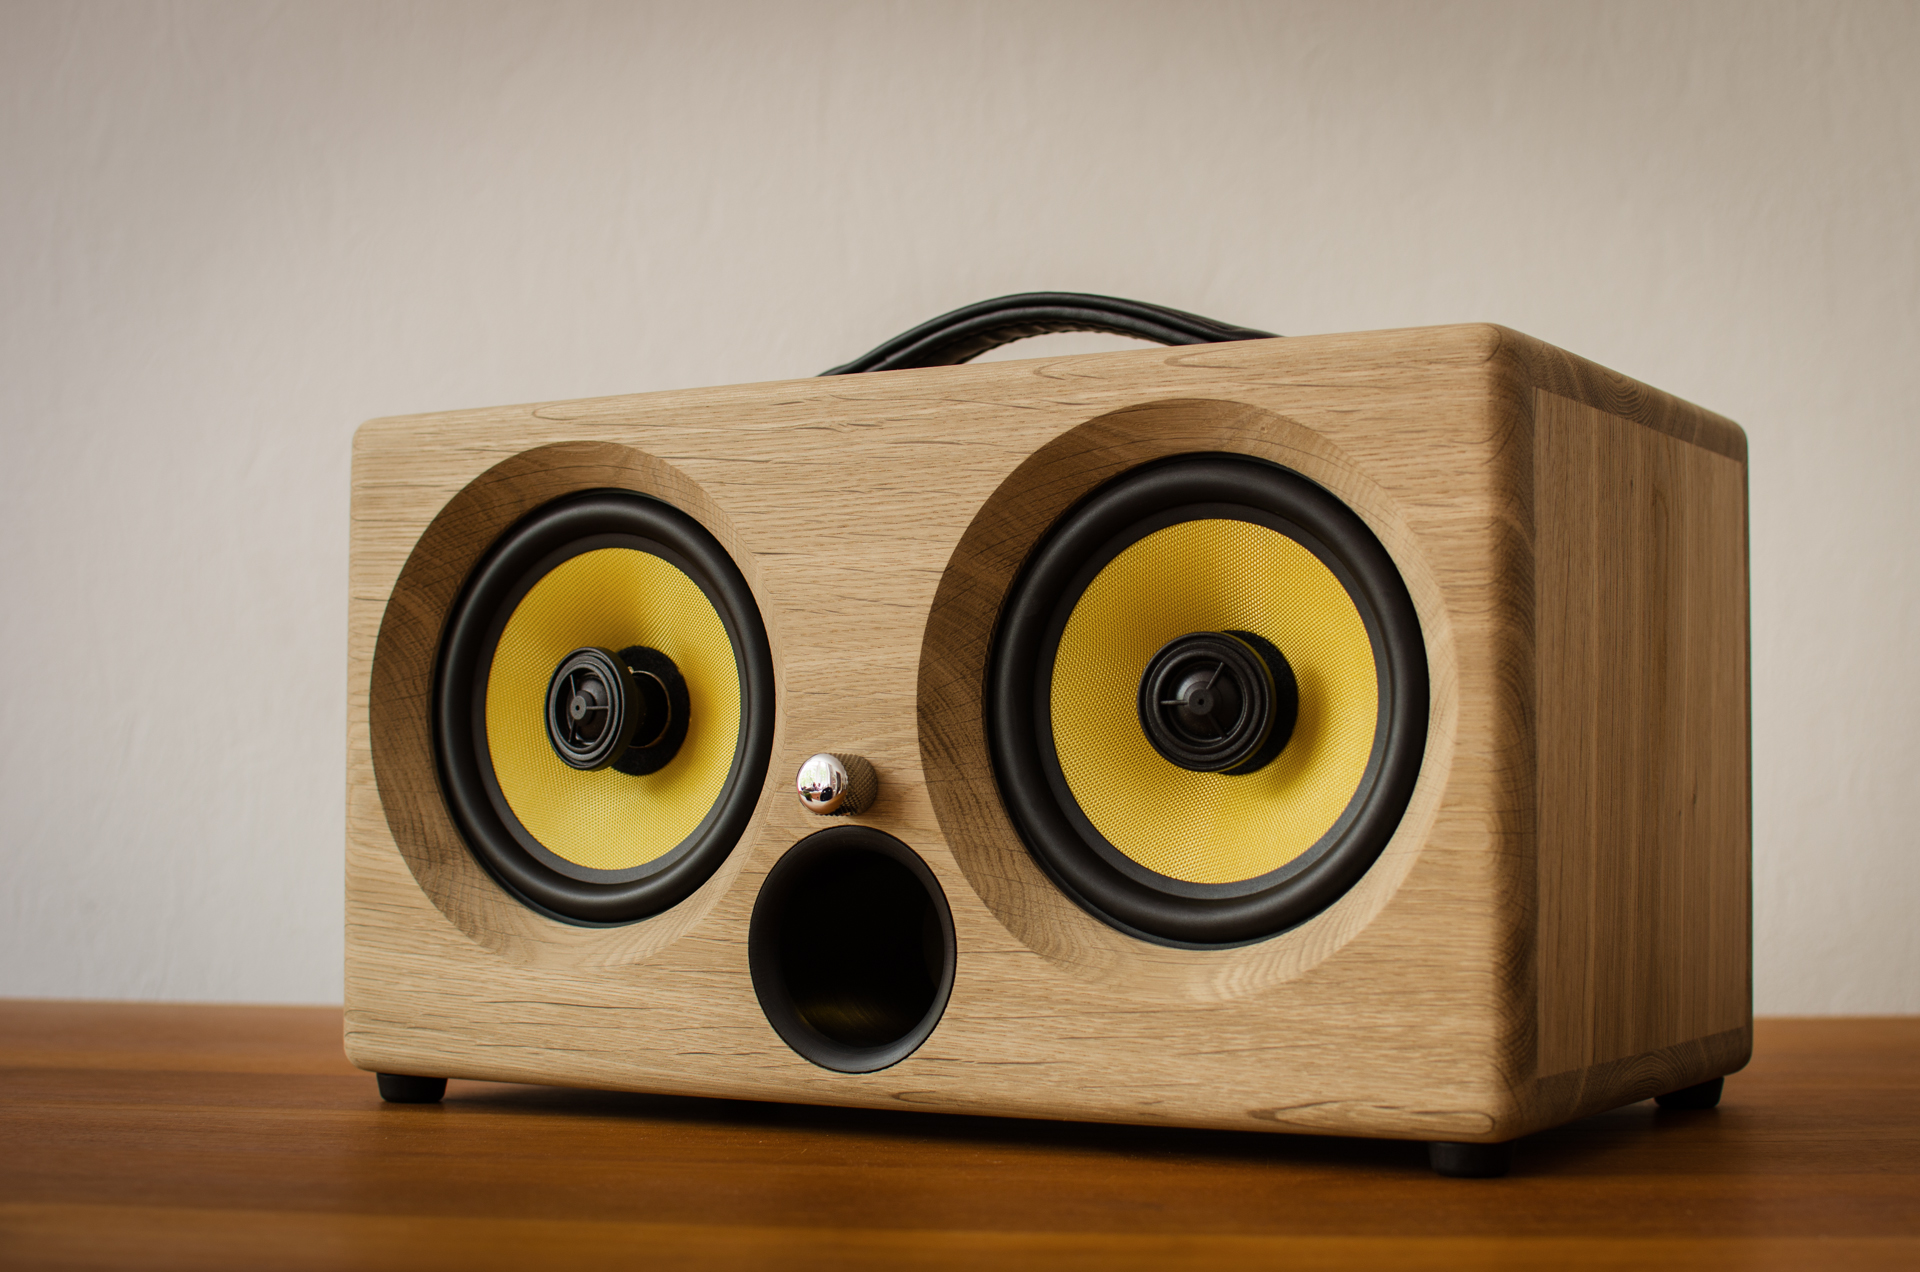 The best bass speakers